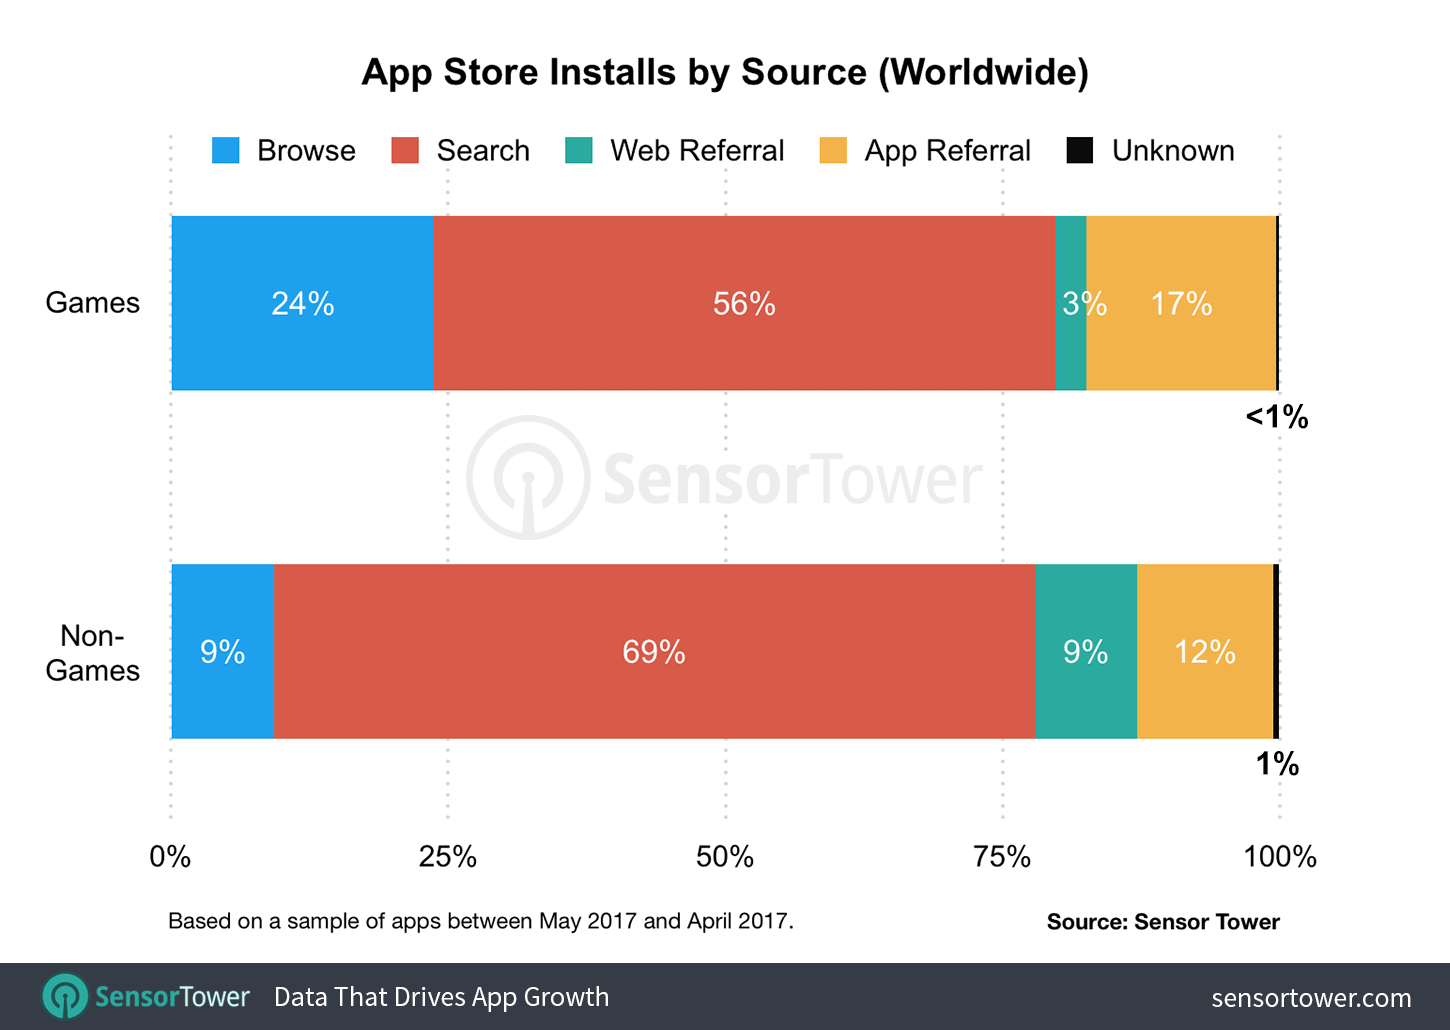 alt="App Store Install by Source"